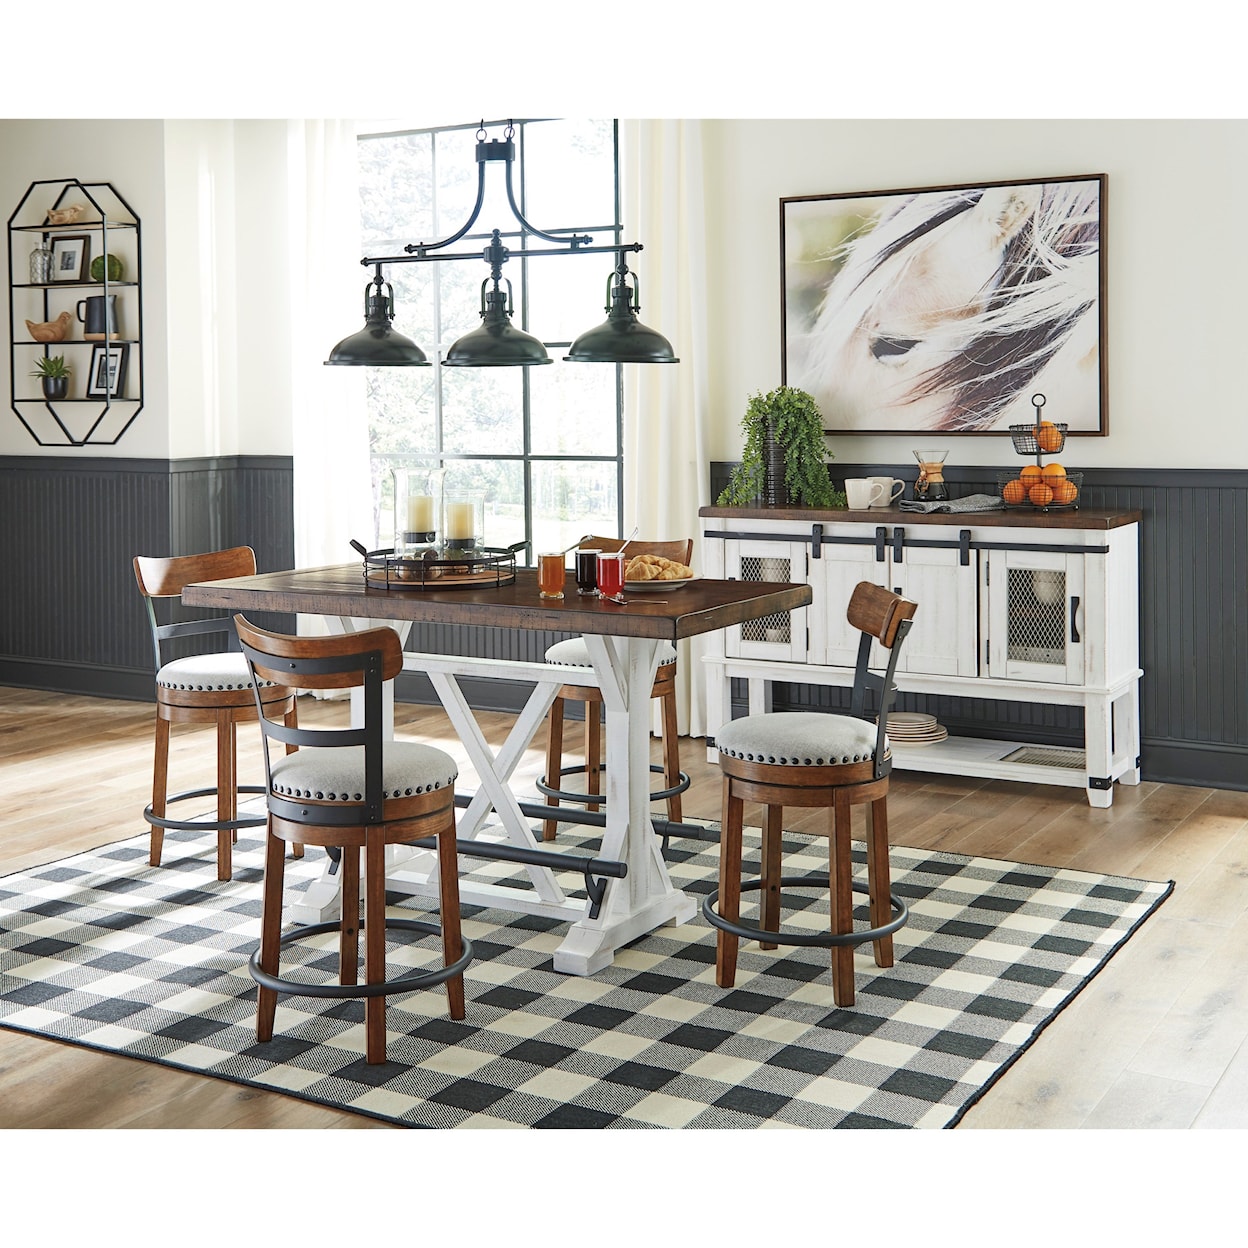 Signature Design Valebeck Casual Dining Room Group